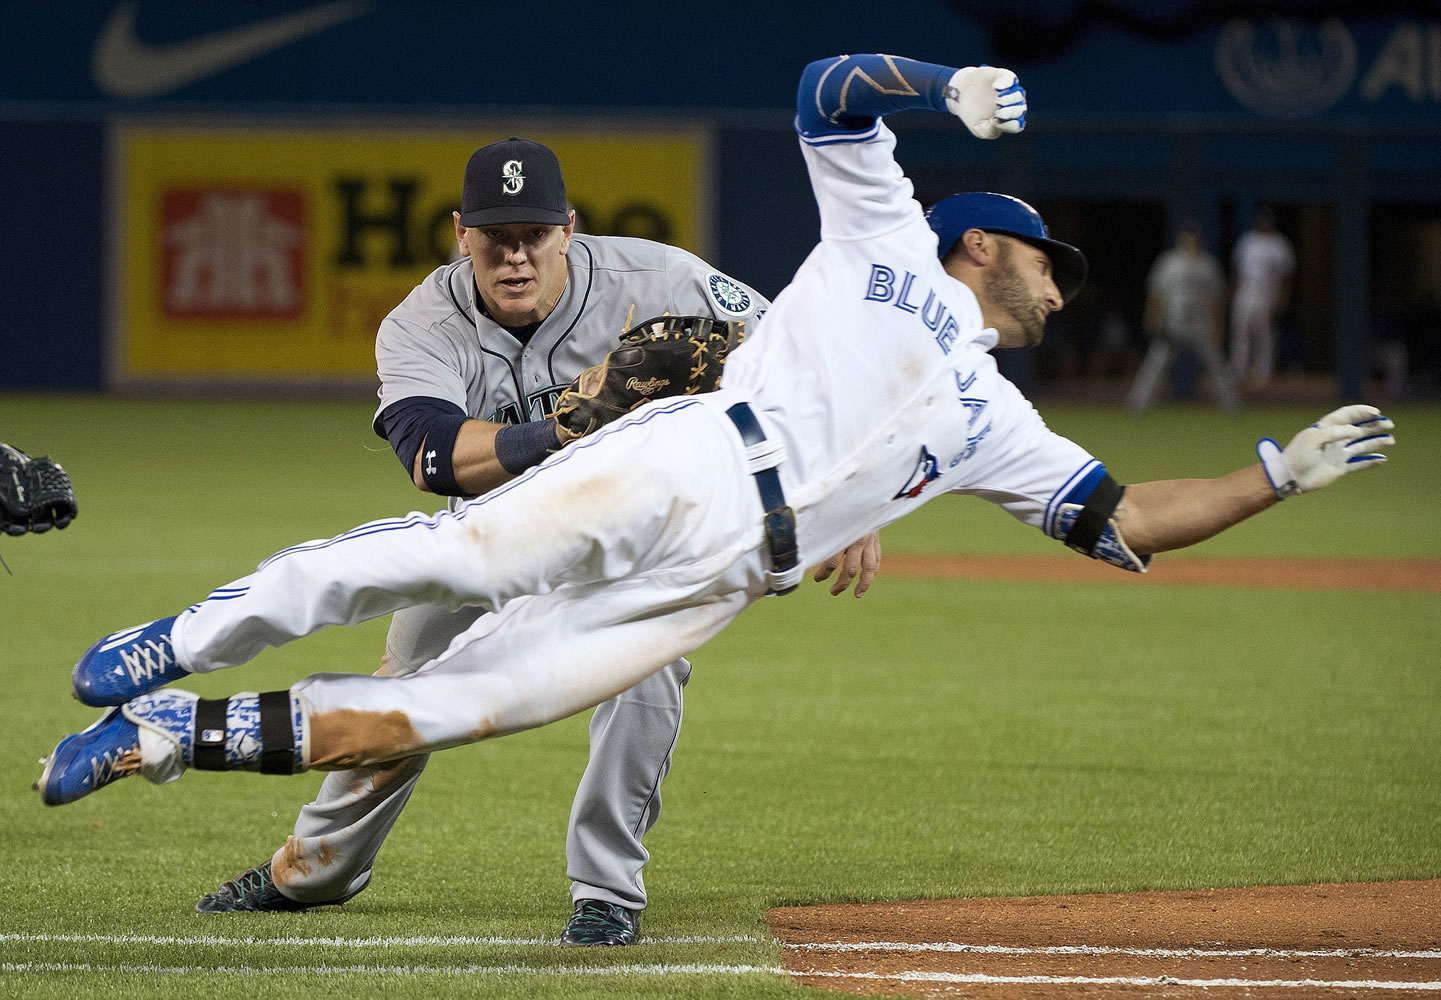 Toronto Blue Jays' Kevin Pillar, right, makes a diving attempt but gets tagged out at first base by Seattle Mariners first baseman Logan Morrison during the ninth inning in Toronto on Friday, May 22, 2015.